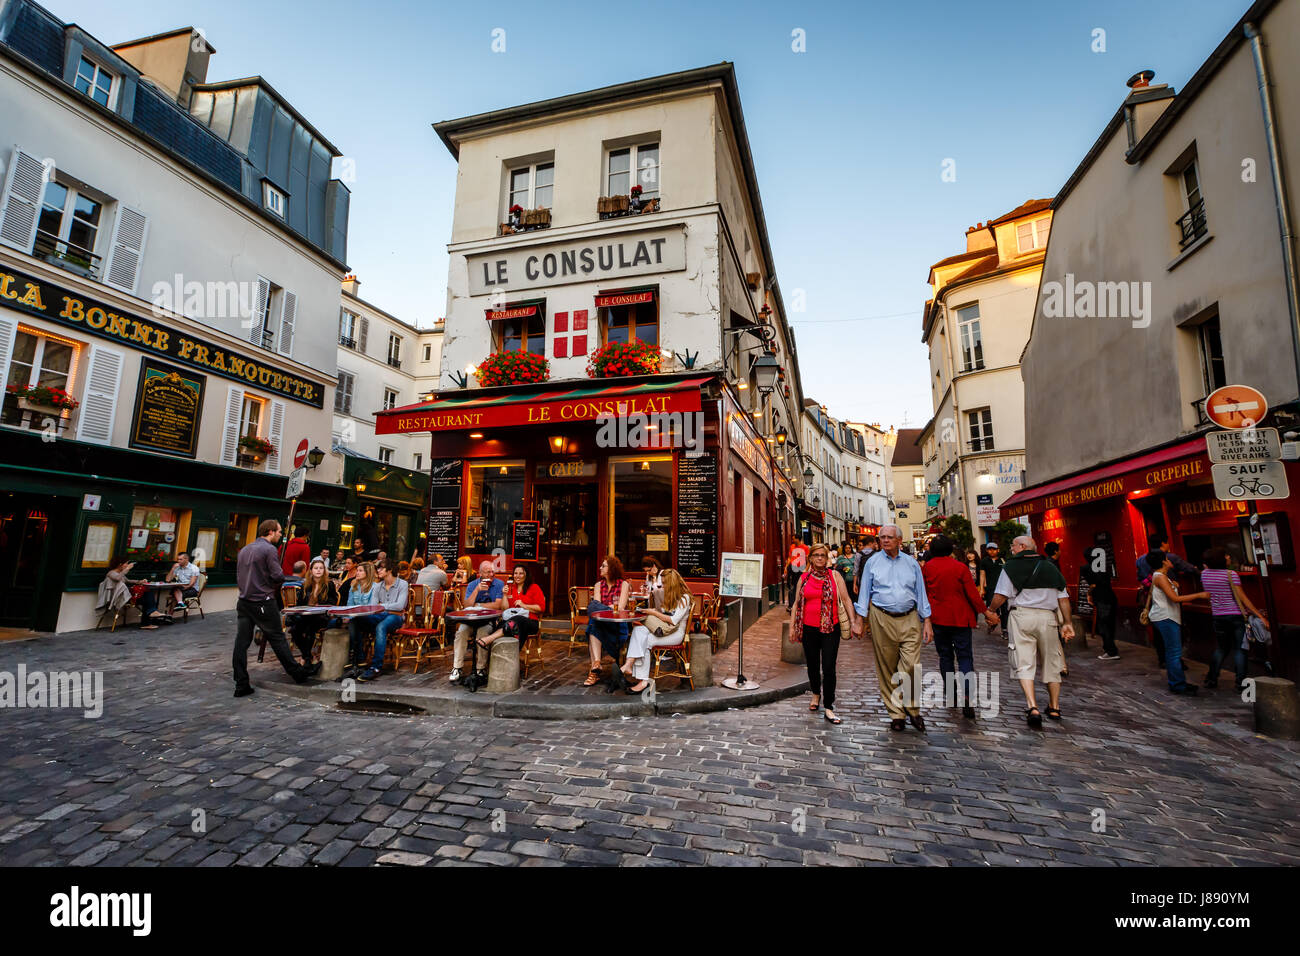 PARIS - July 1: View of typical paris cafe on July 1, 2013 in Paris. Montmartre area is among most popular destinations in Paris, Le Consulat is a typ Stock Photo